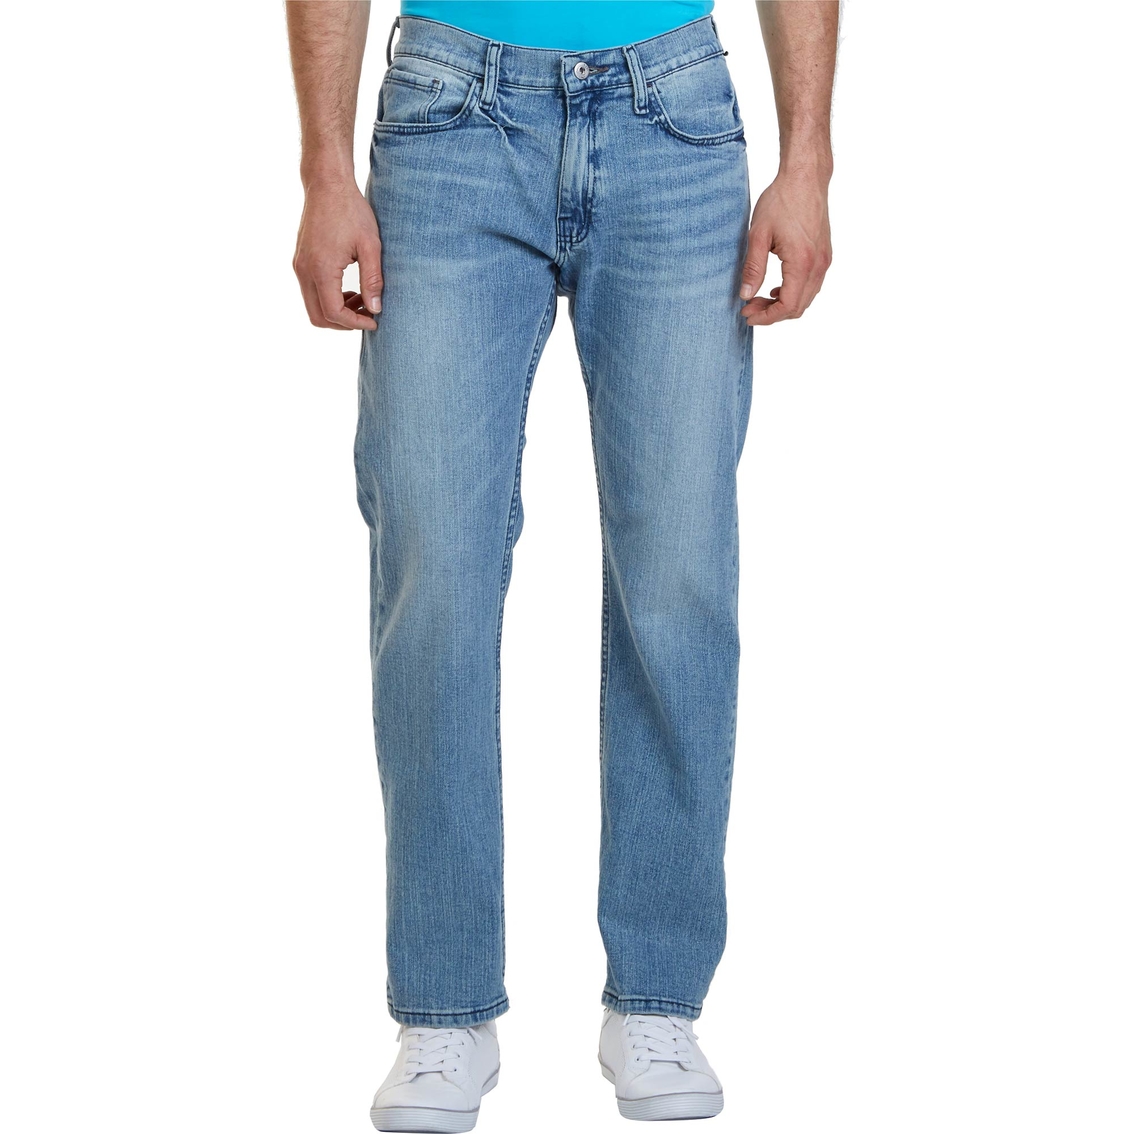 Nautica Relaxed Fit Light Wash Jeans | Jeans | Clothing & Accessories ...